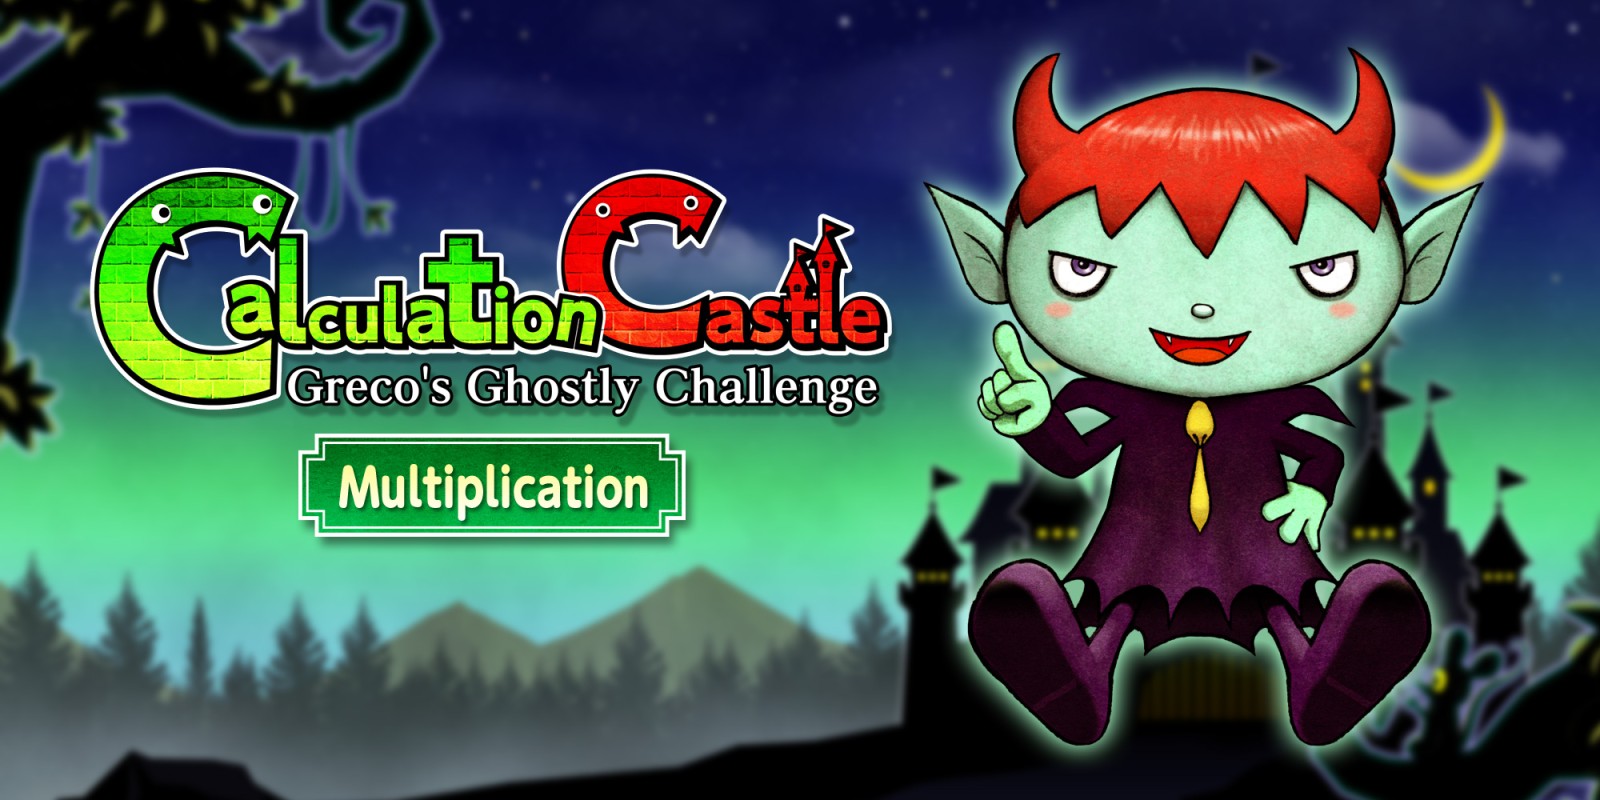 Calculation Castle: Greco's Ghostly Challenge 